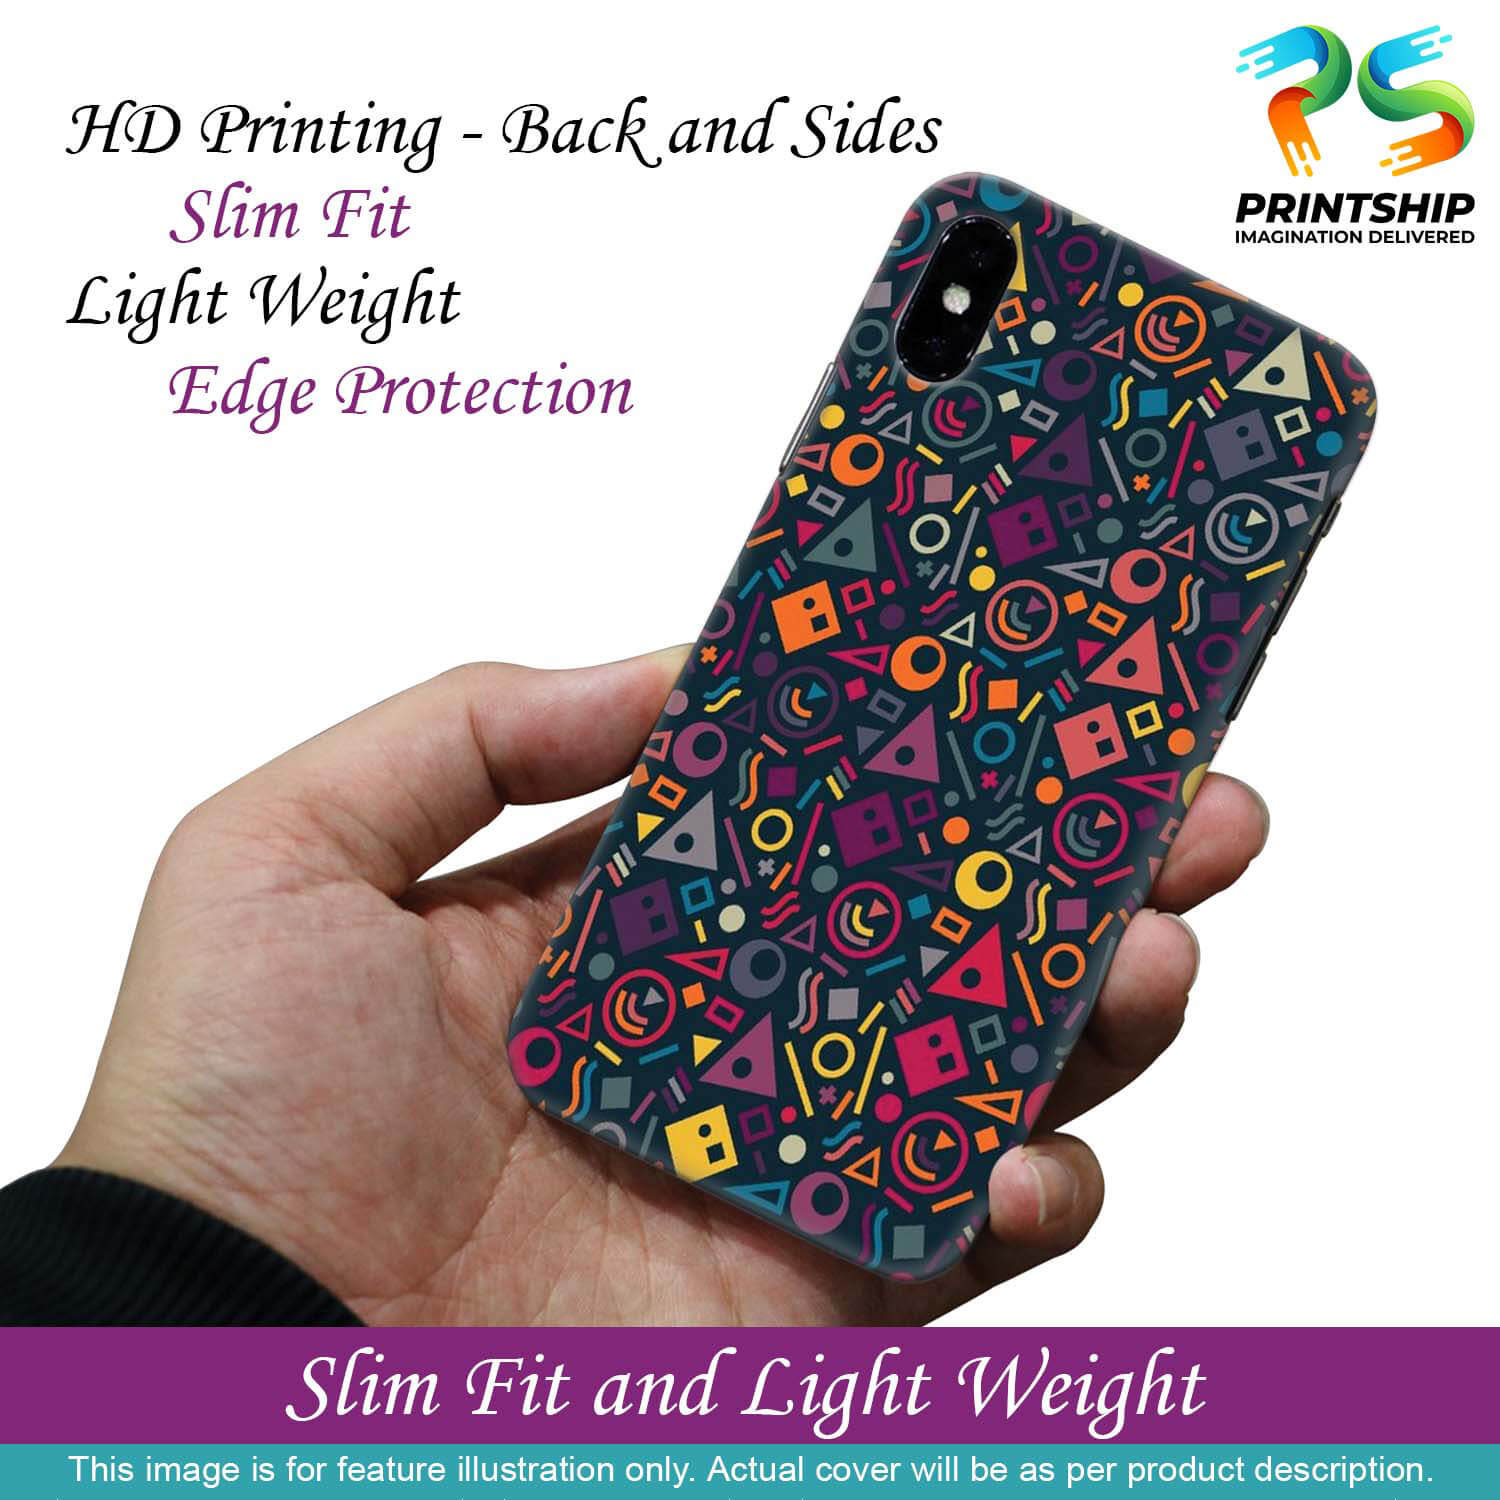 PS1304-Abstract Pattern Back Cover for Oppo A11K